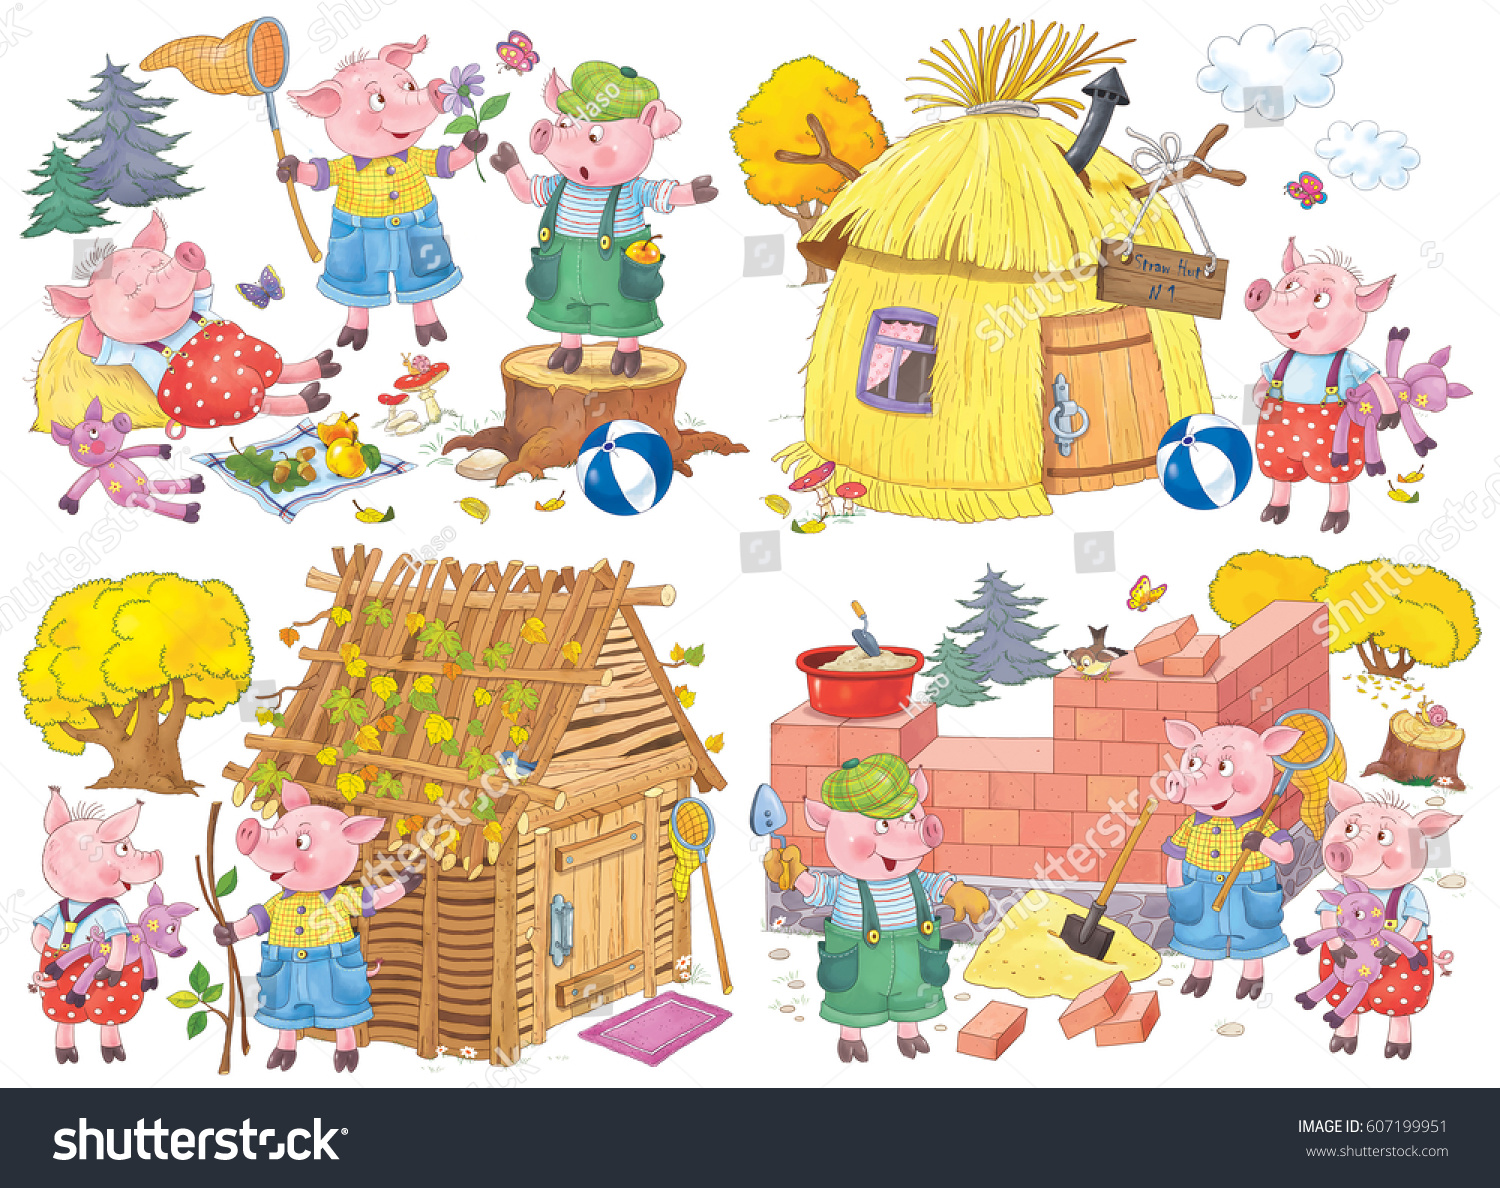 Three Little Pigs Fairy Tale Coloring Stock Illustration 607199951 Shutterstock